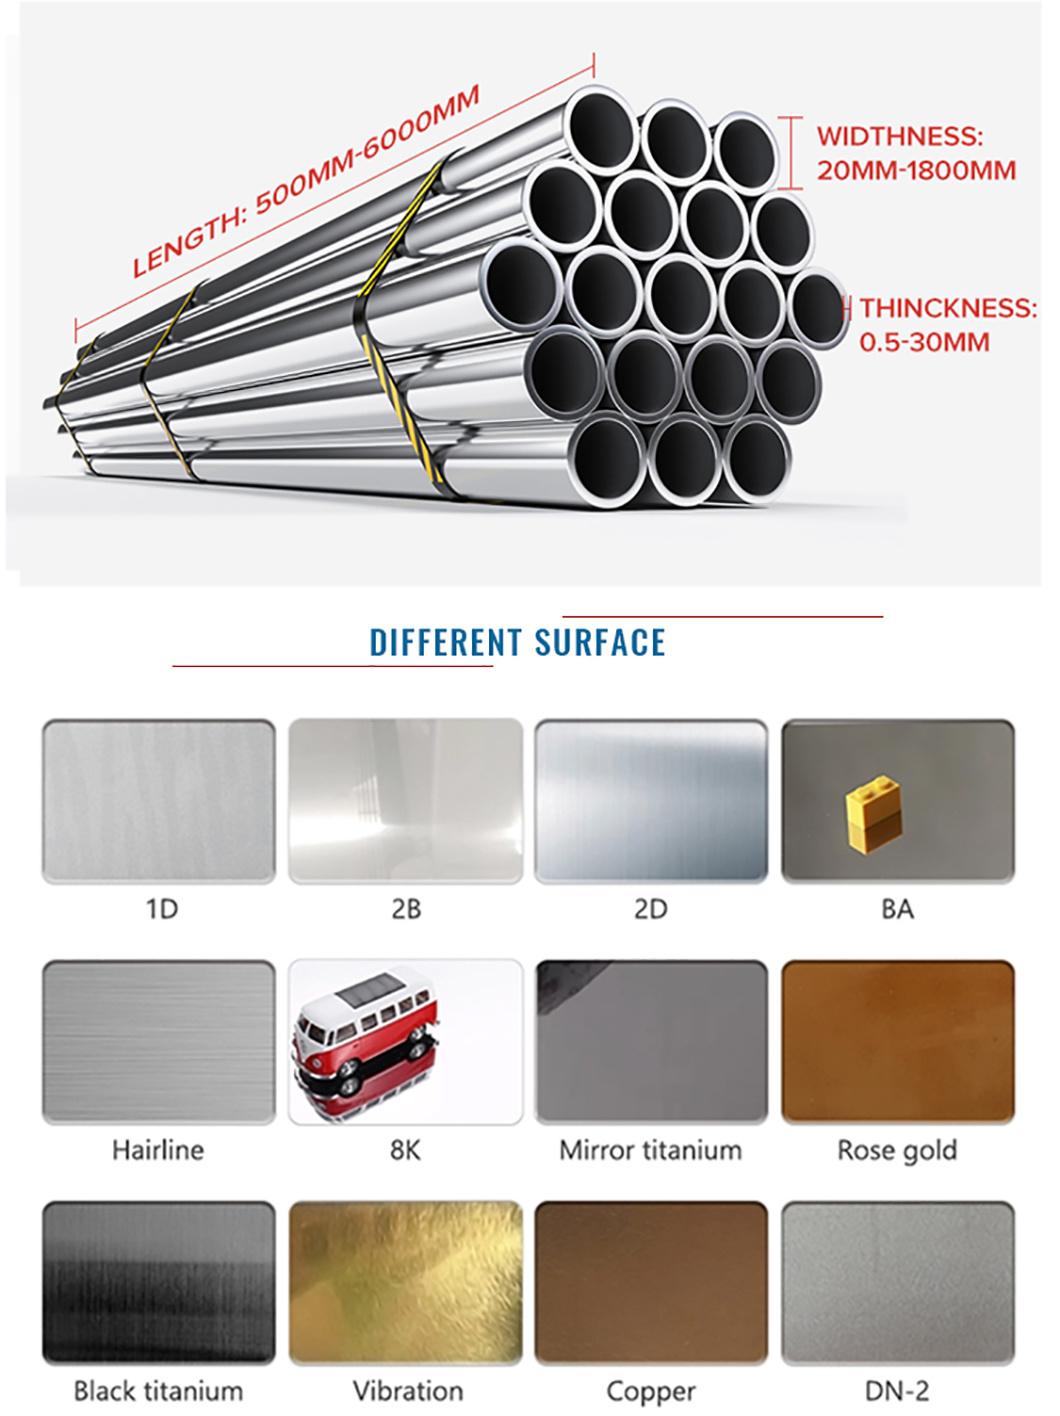 Fittings Per Ton Round/Rectangle/Square AISI Ss Steel Tube 201 304 316/L Stainless Steel Tube